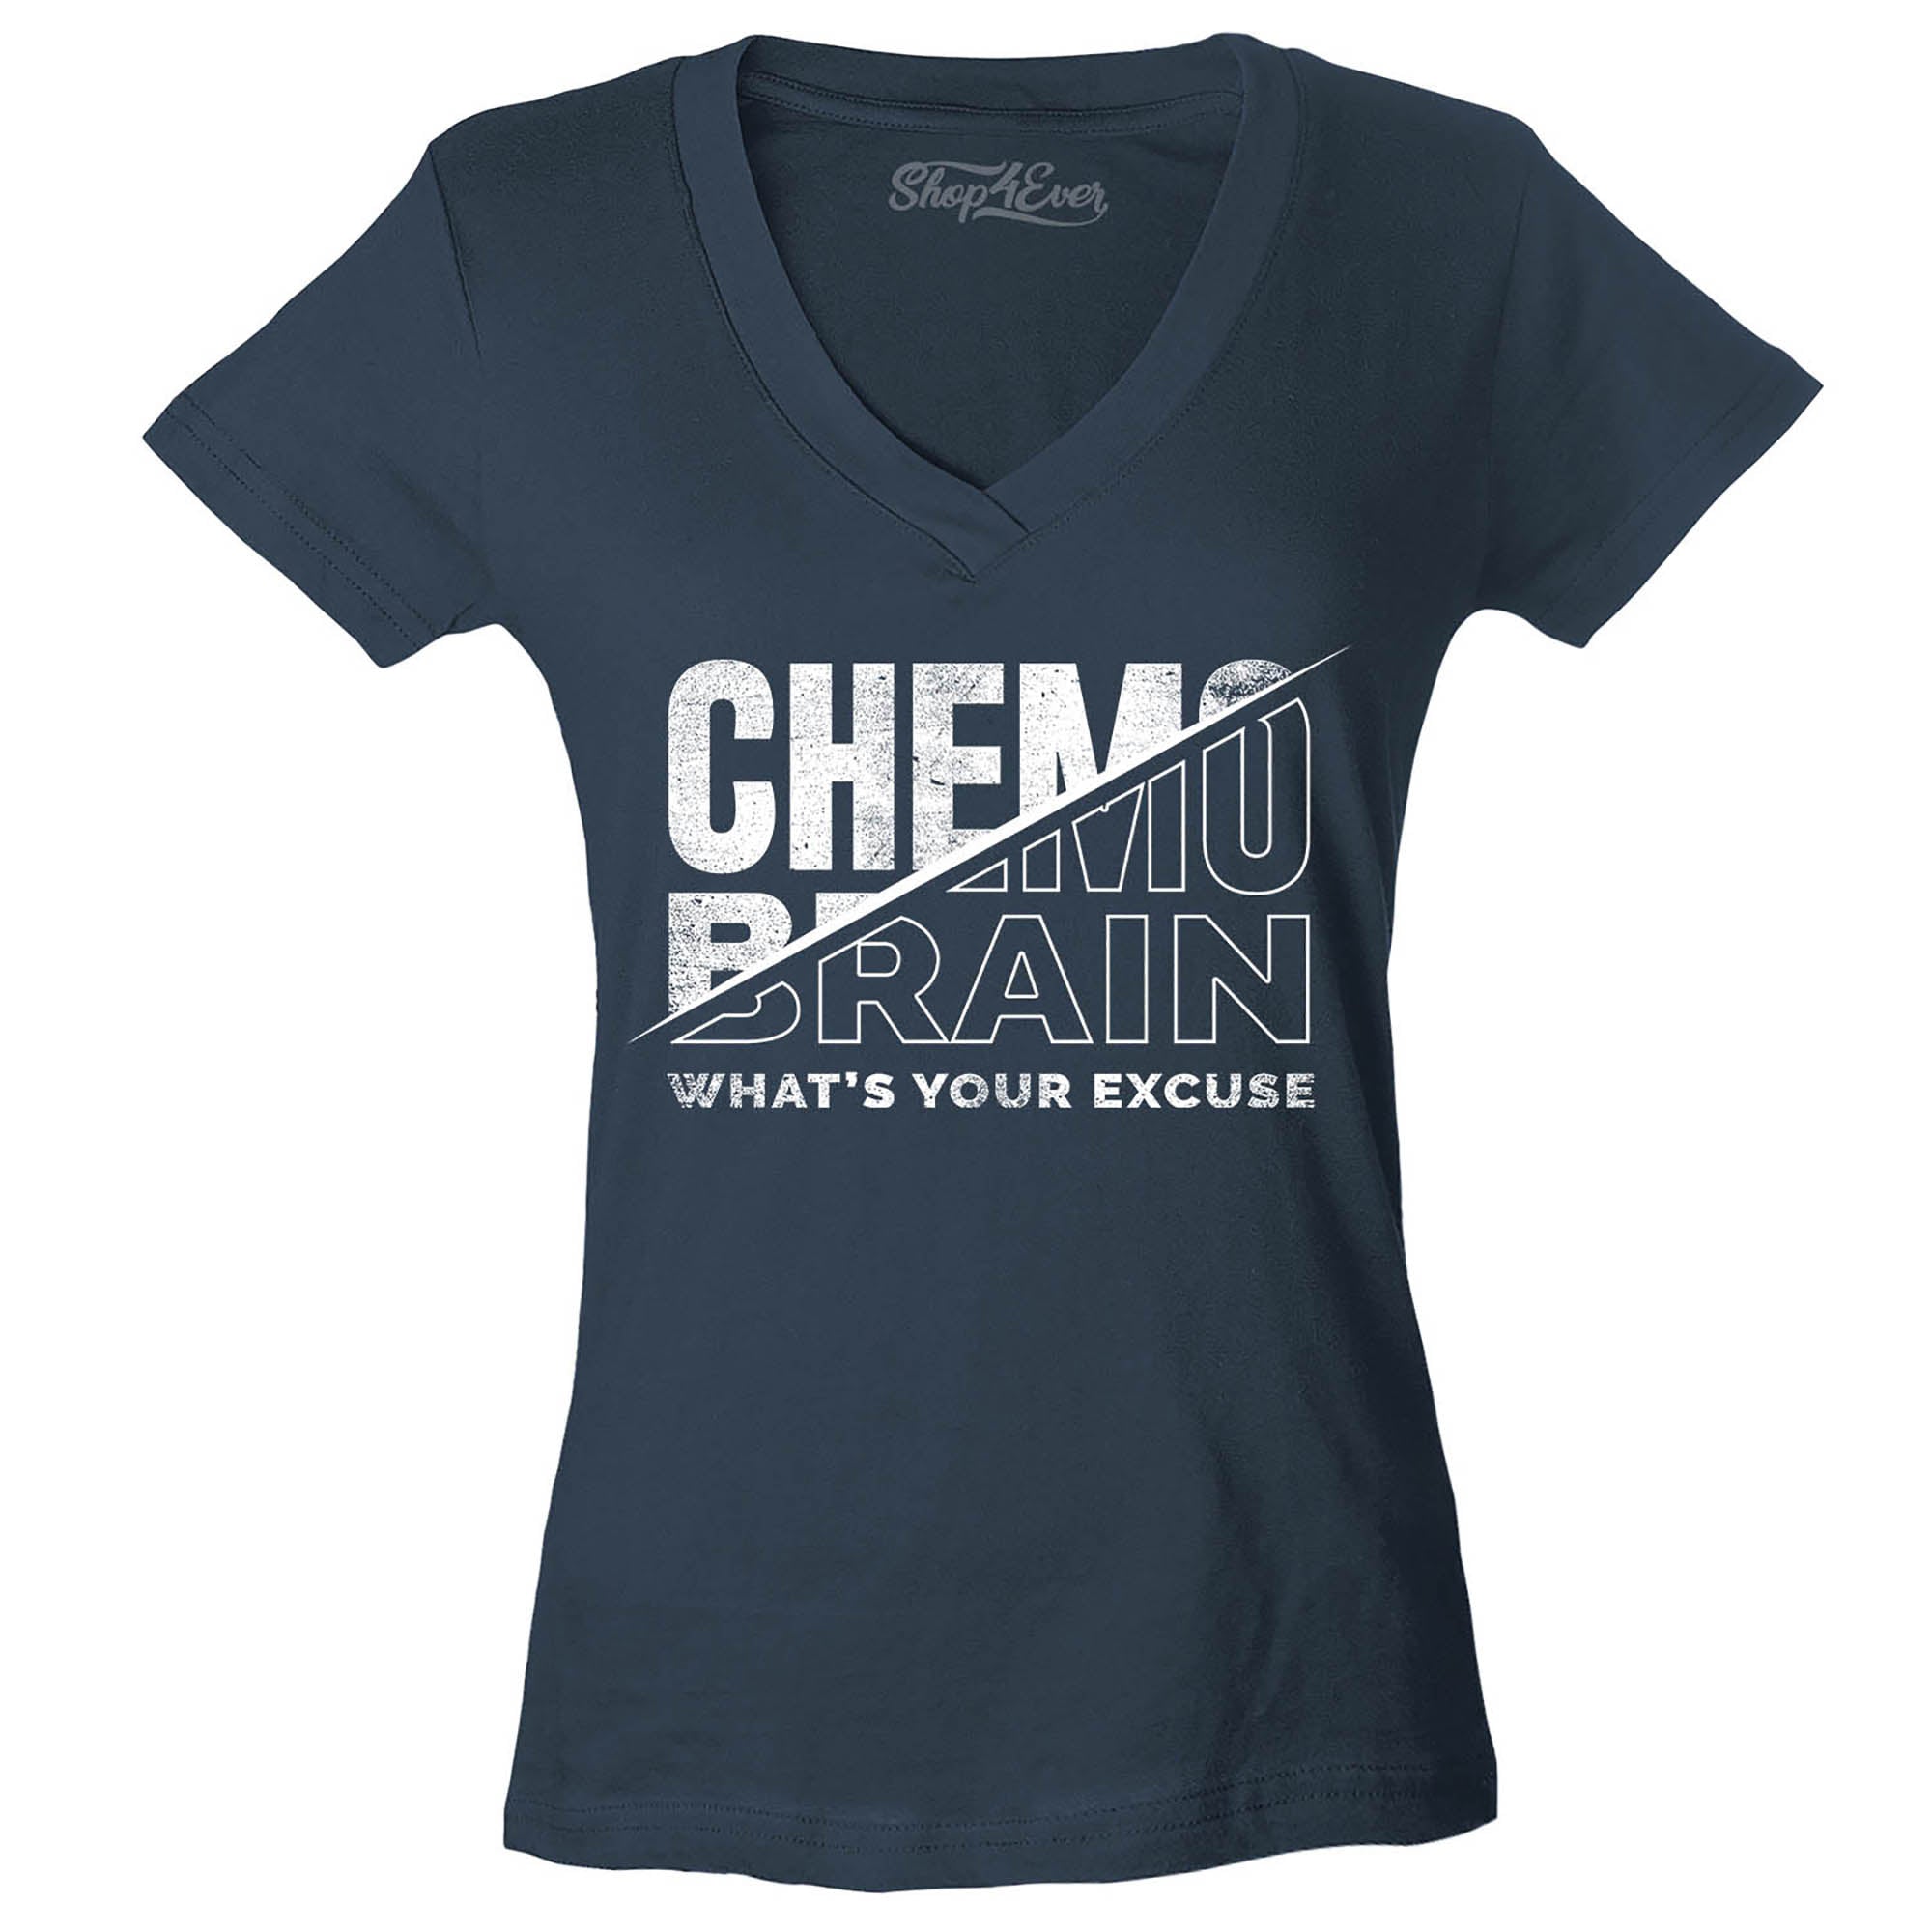 Chemo Brain What's Your Excuse? Funny Women's V-Neck T-Shirt Slim Fit